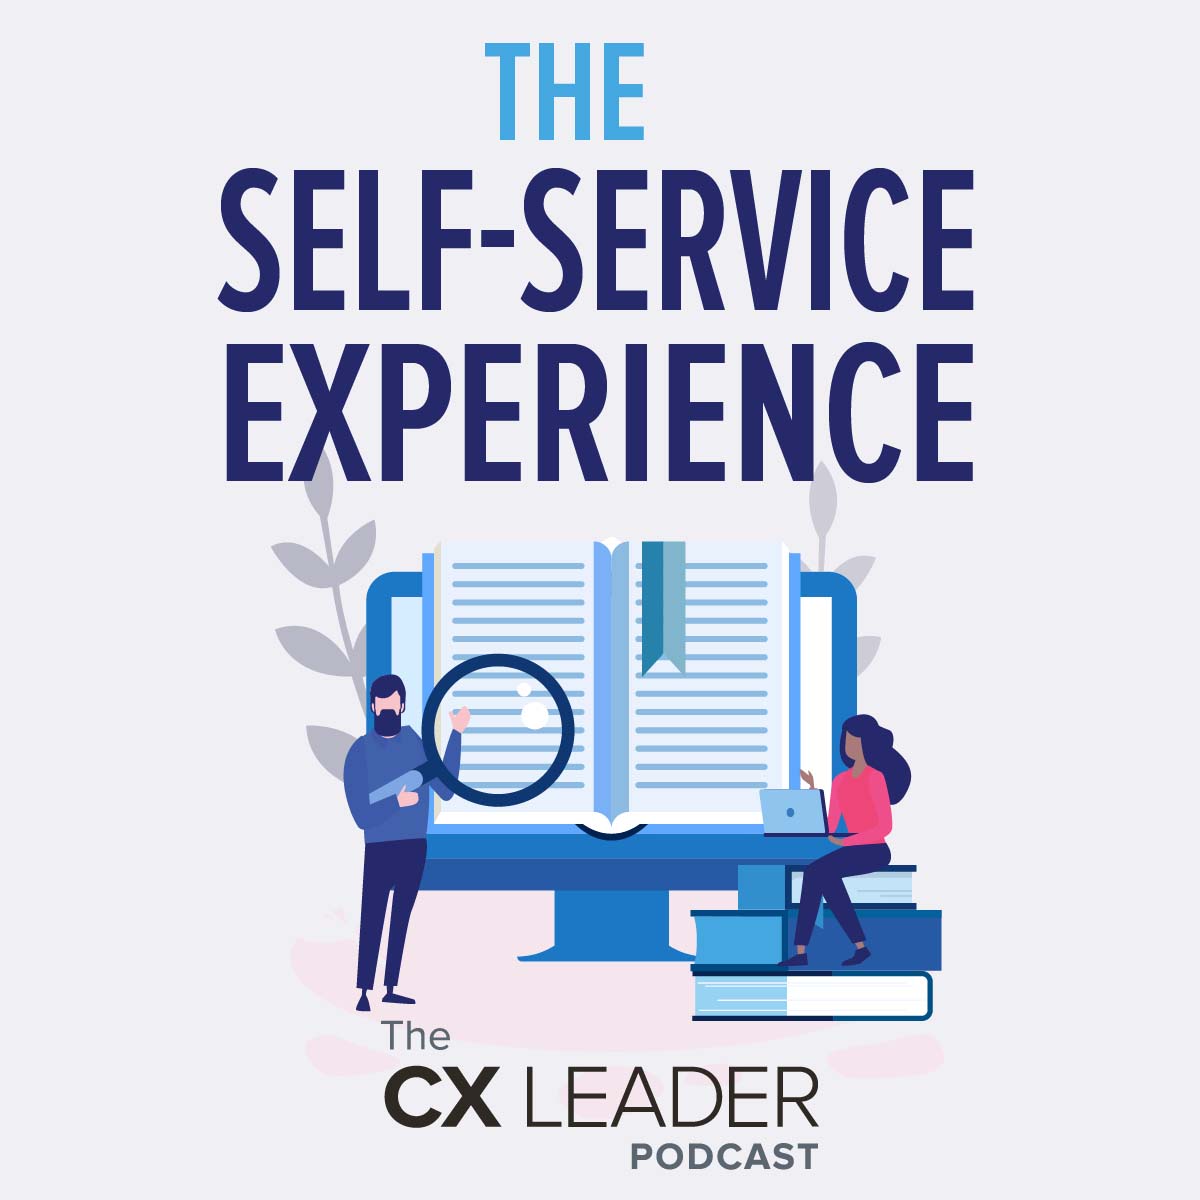 The Self-Service Experience